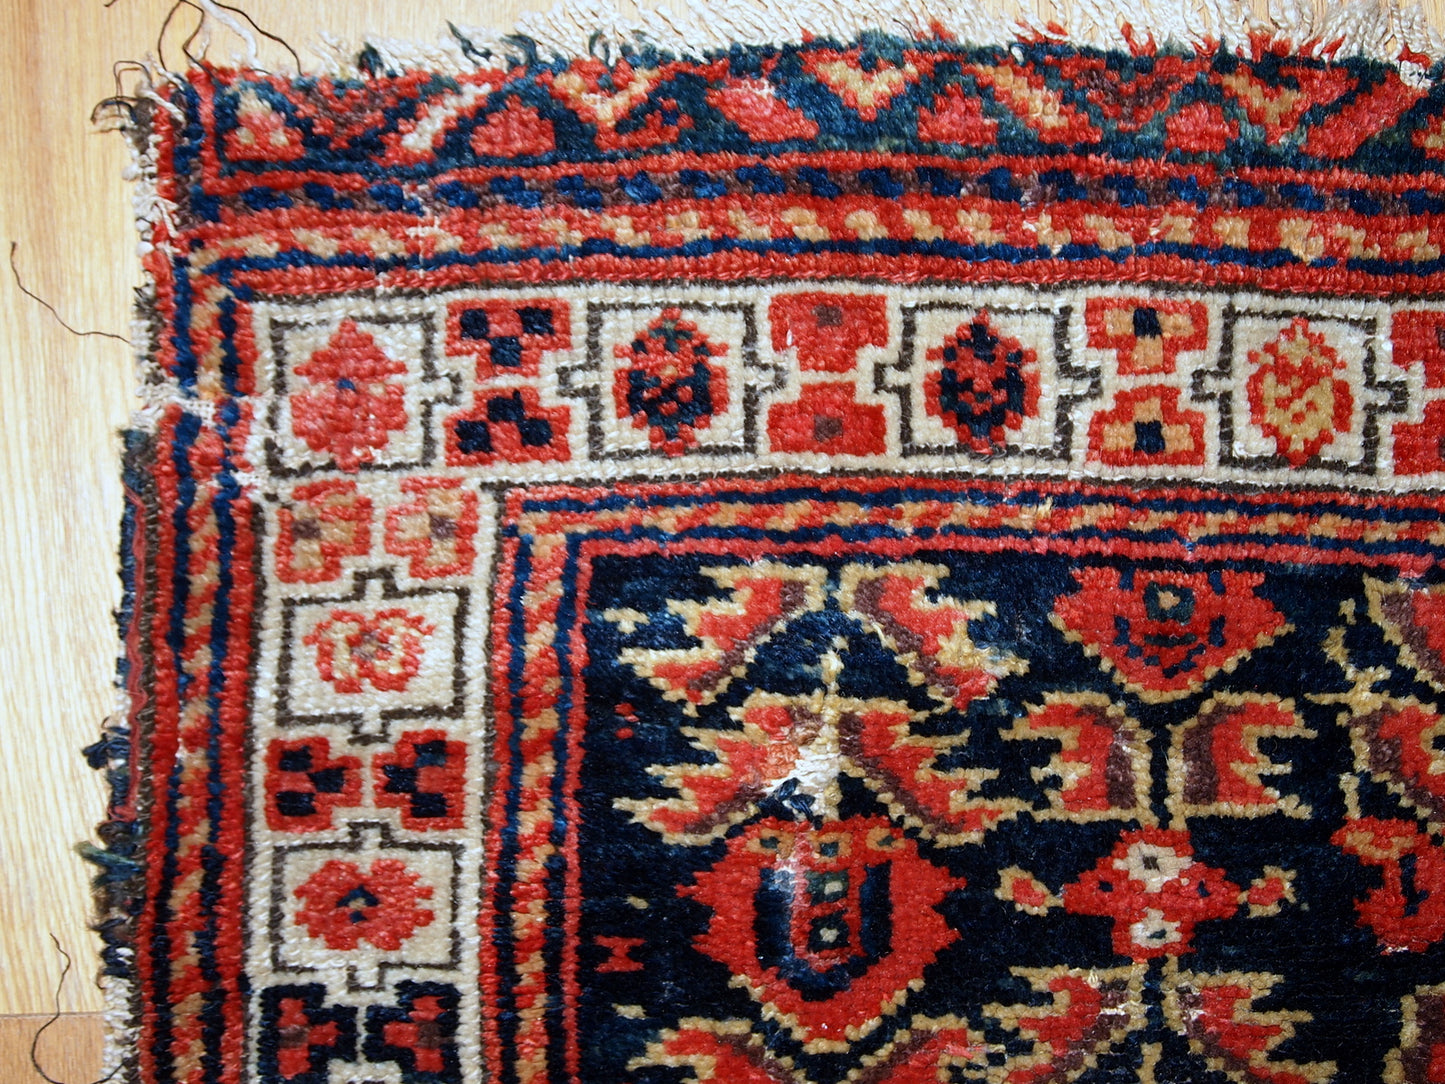 Hand made antique Malayer bag face in original condition with some age wear. The rug made has traditional tribal design in navy blue, white and red shades. 